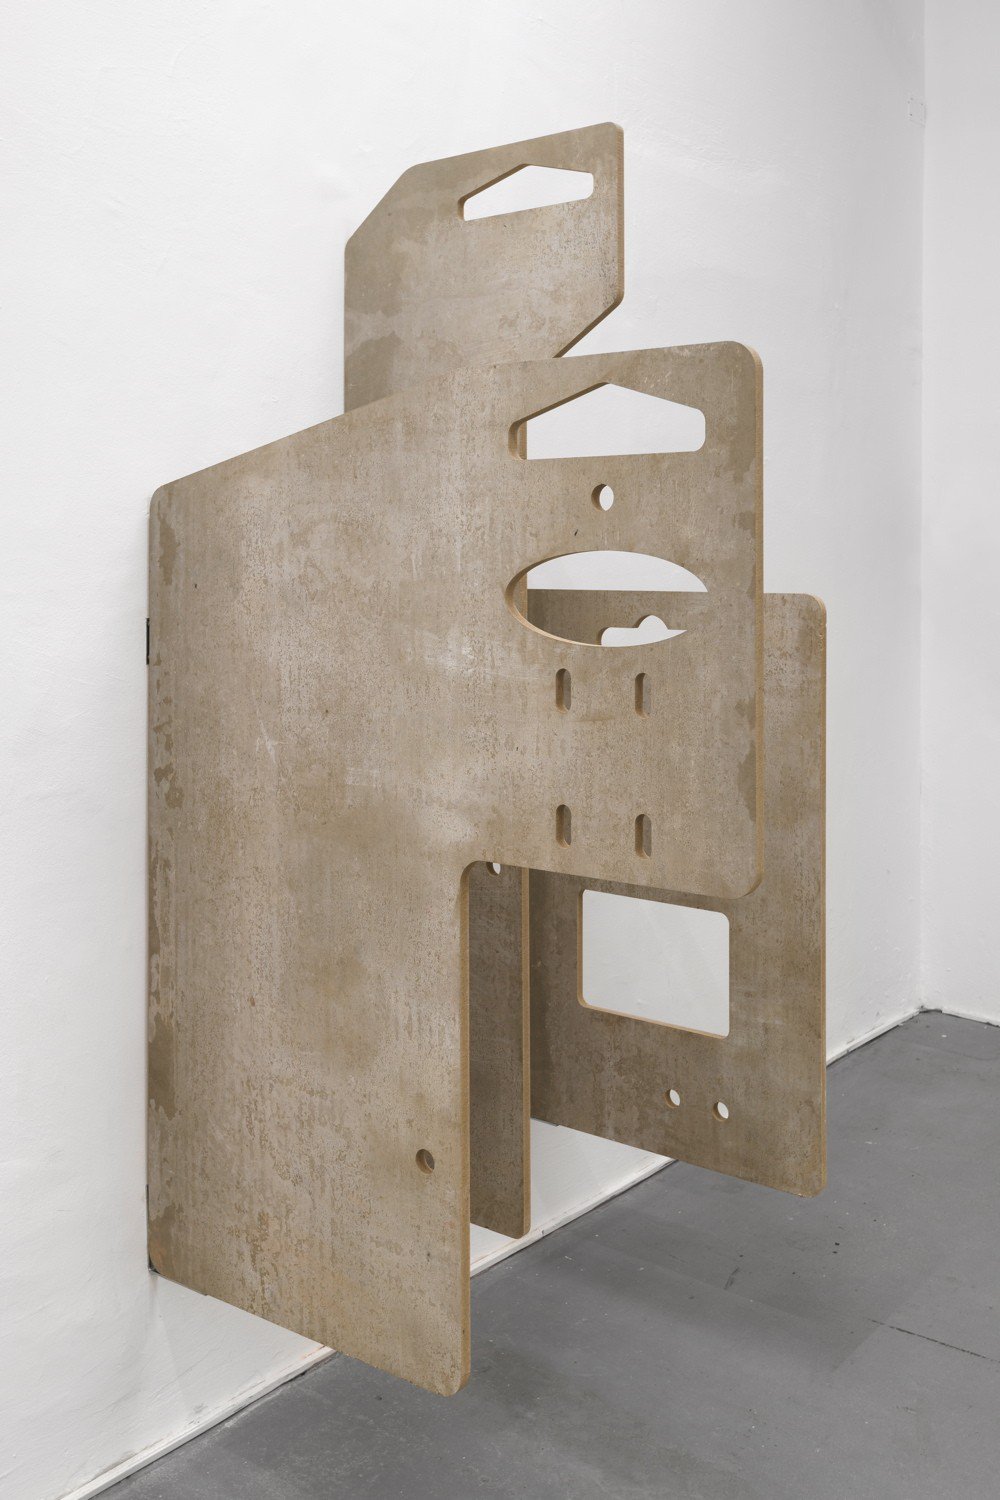 Benjamin HirteUntitled (tags), 2014Cement treated chipboard